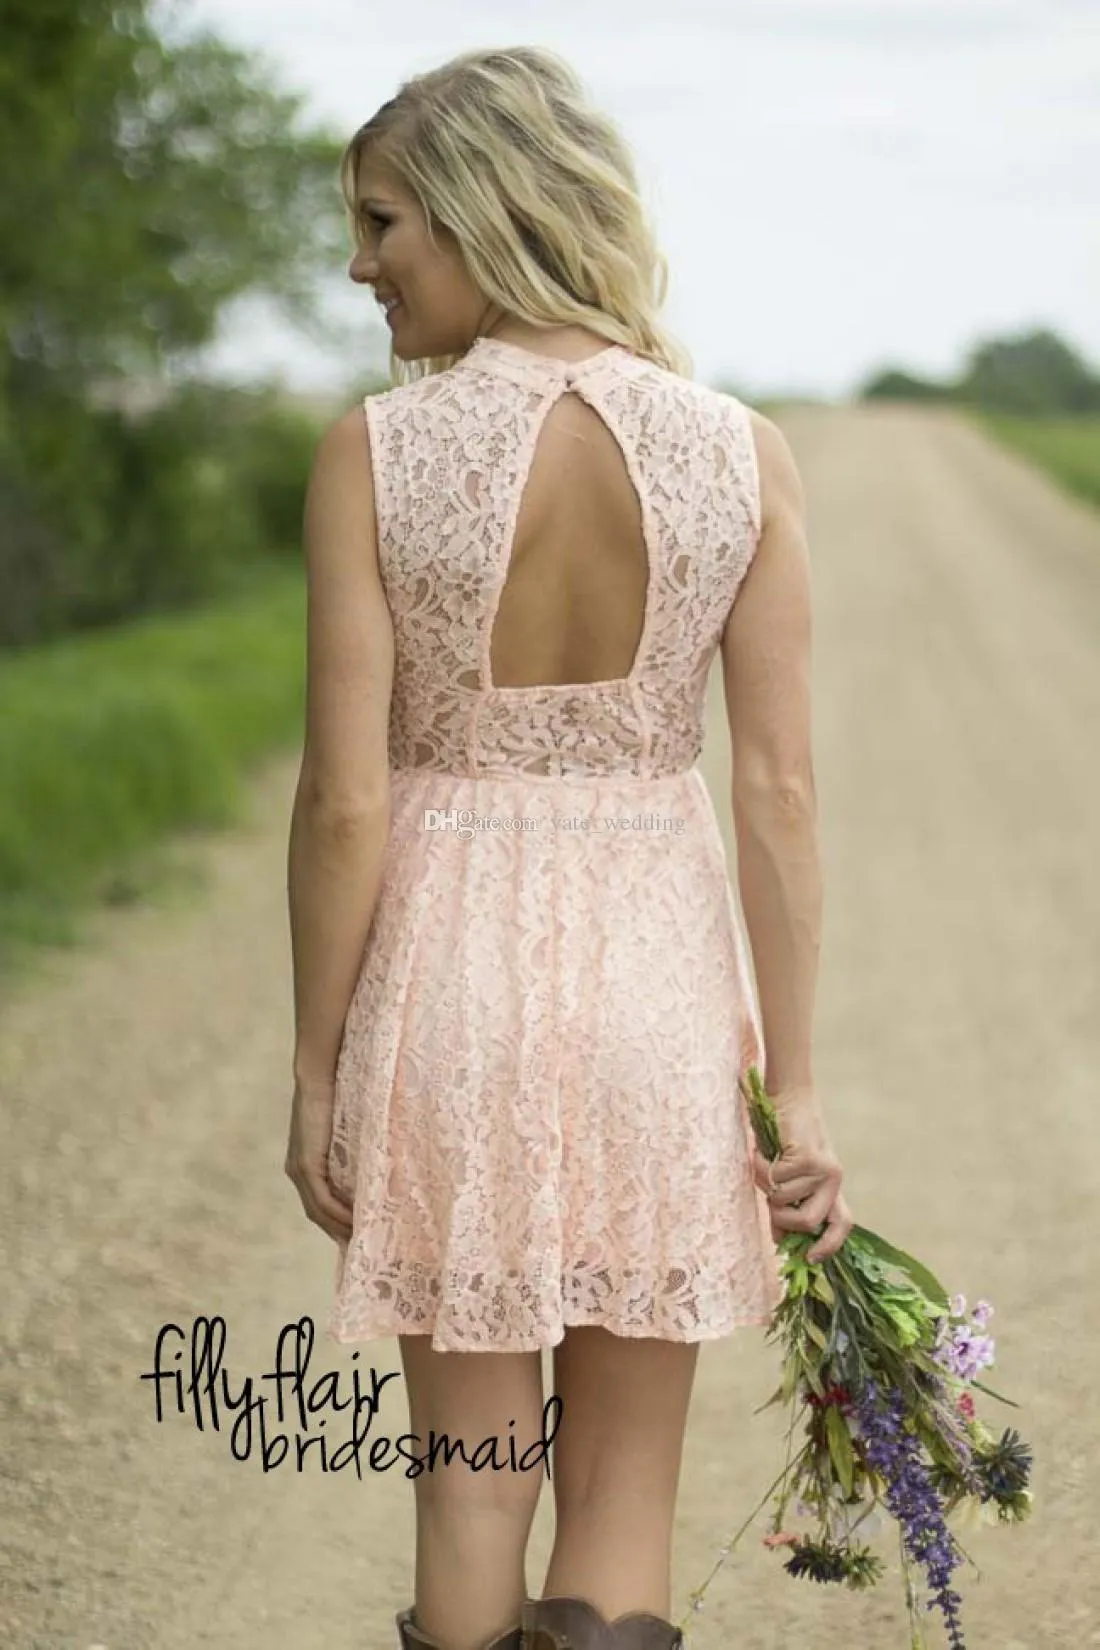 2019 Lace Short Bridesmaid Dresses High Neck Sleeveless Open Back Sequins Pink Bridesmaid Gowns Backless Country Wedding Party Dresses Mini